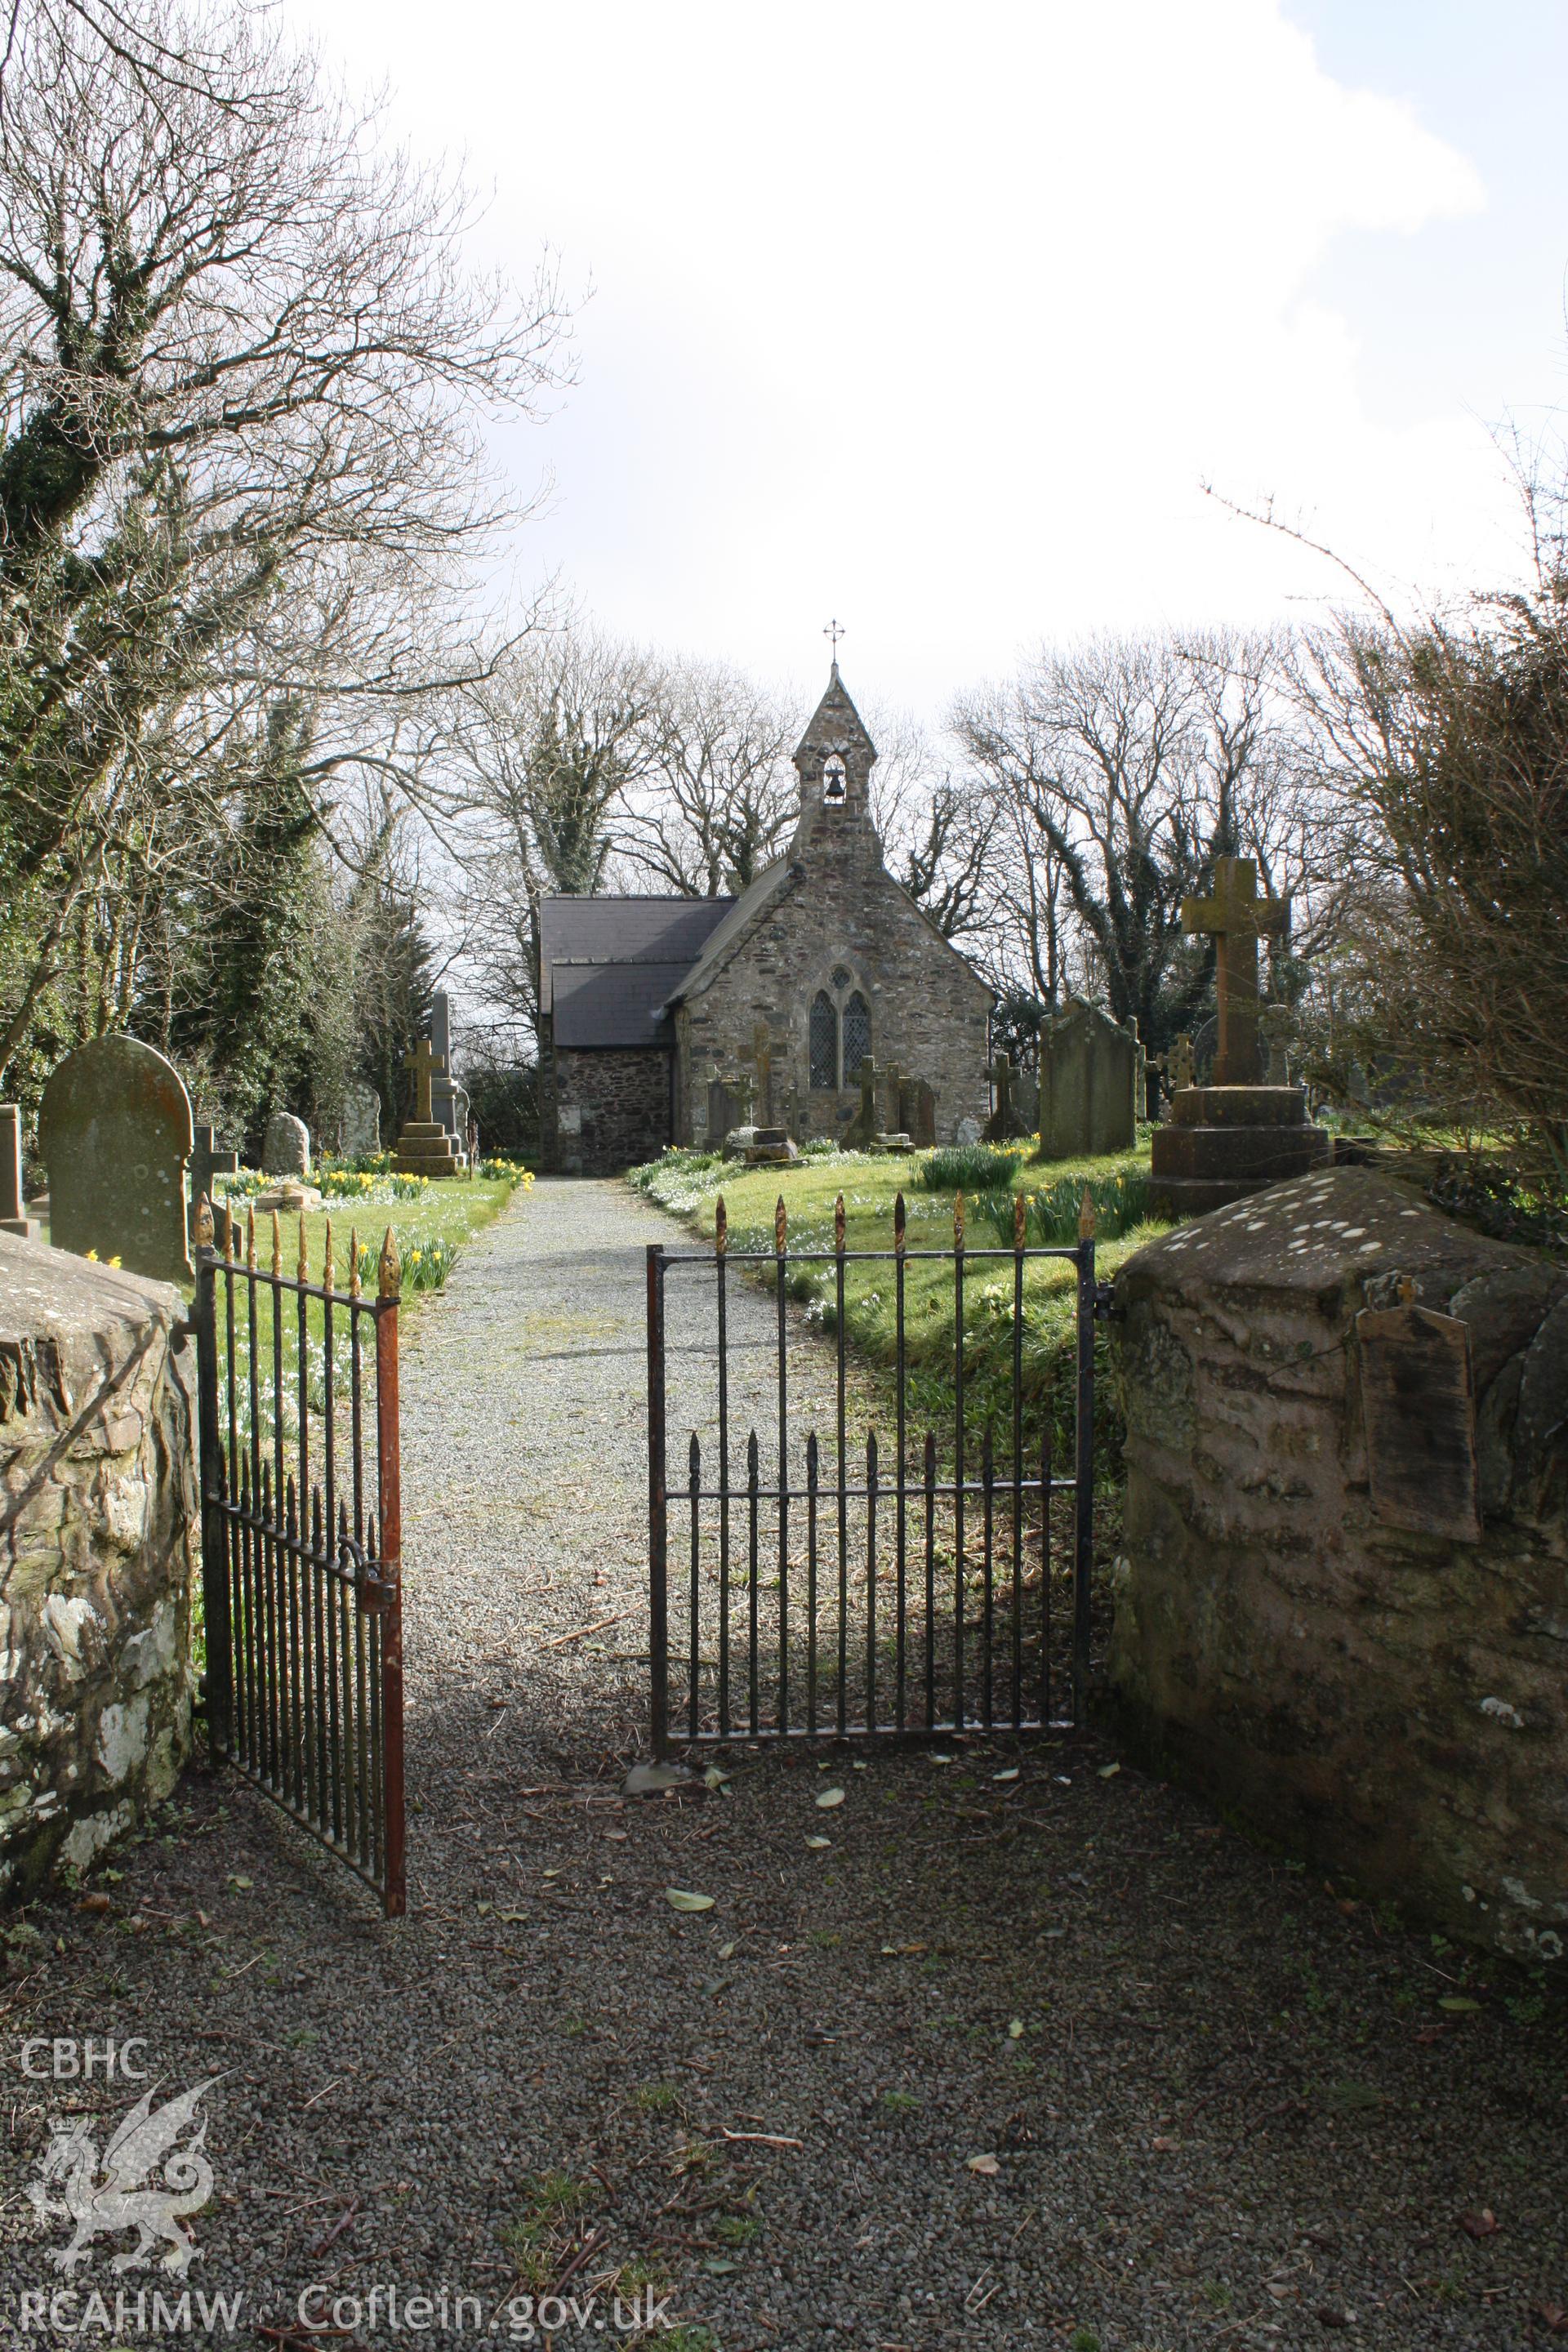 Entrance gate to the west of the churchyard